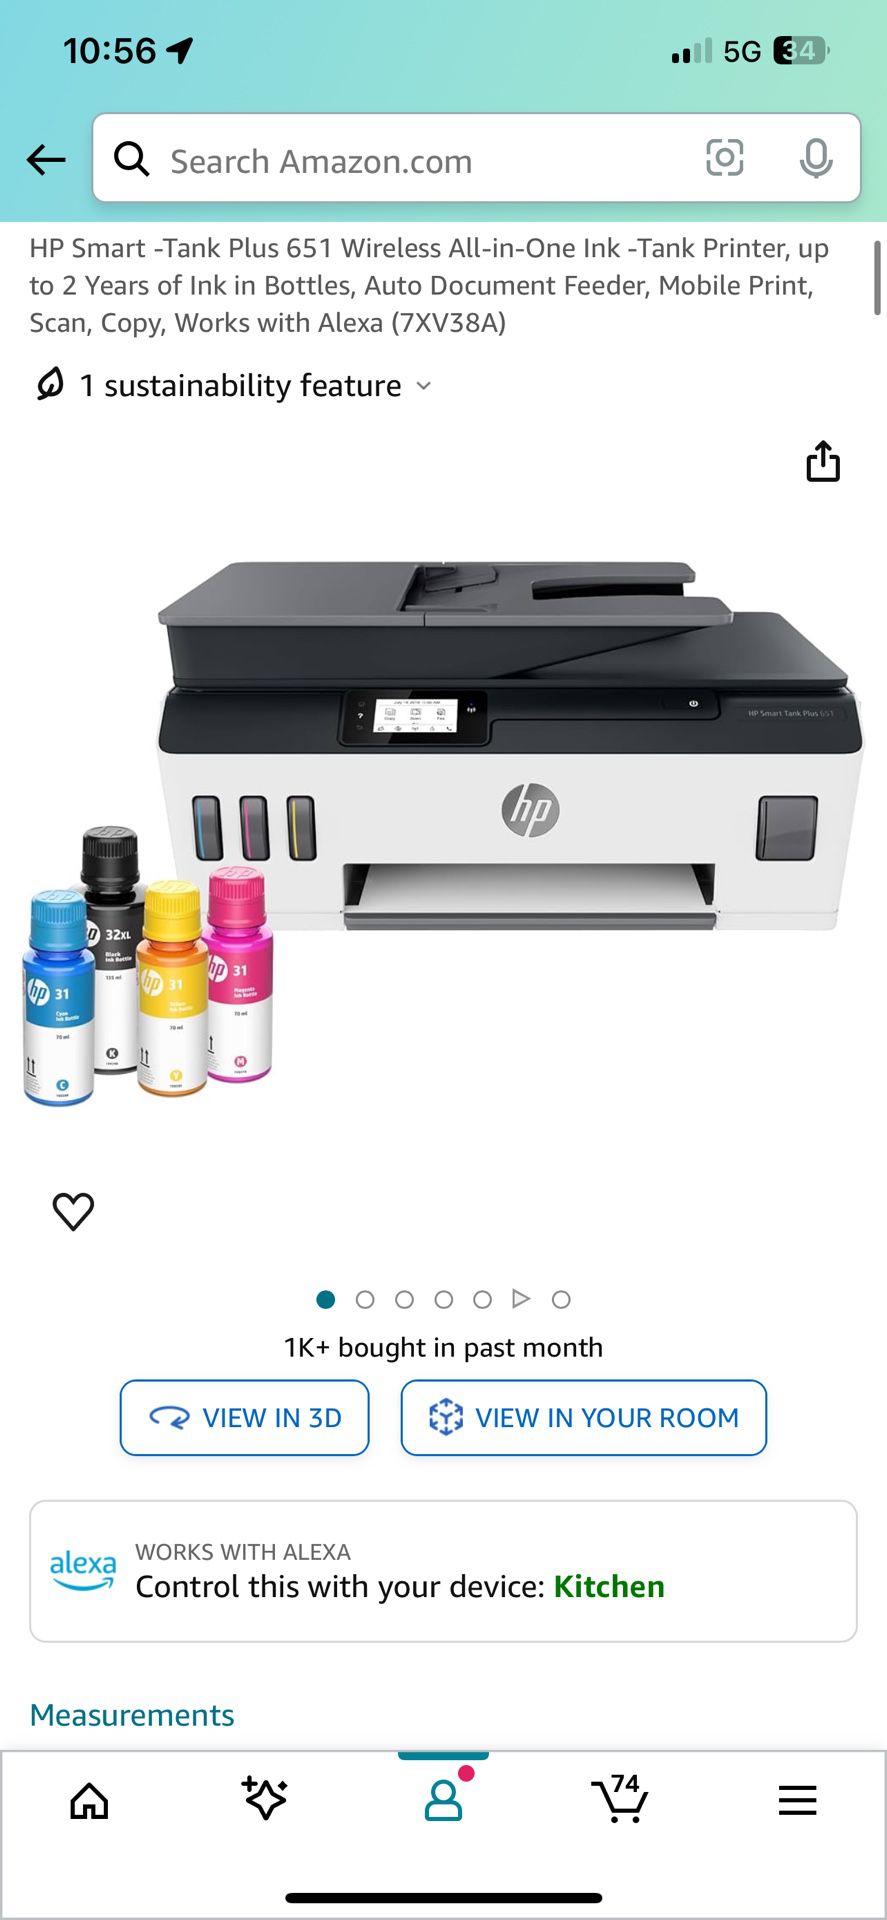 HP Smart -Tank Plus 651 Wireless All-in-One Ink -Tank Printer, up to 2 Years of Ink in Bottles, Auto Document Feeder, Mobile Print, Scan, Copy, Works 